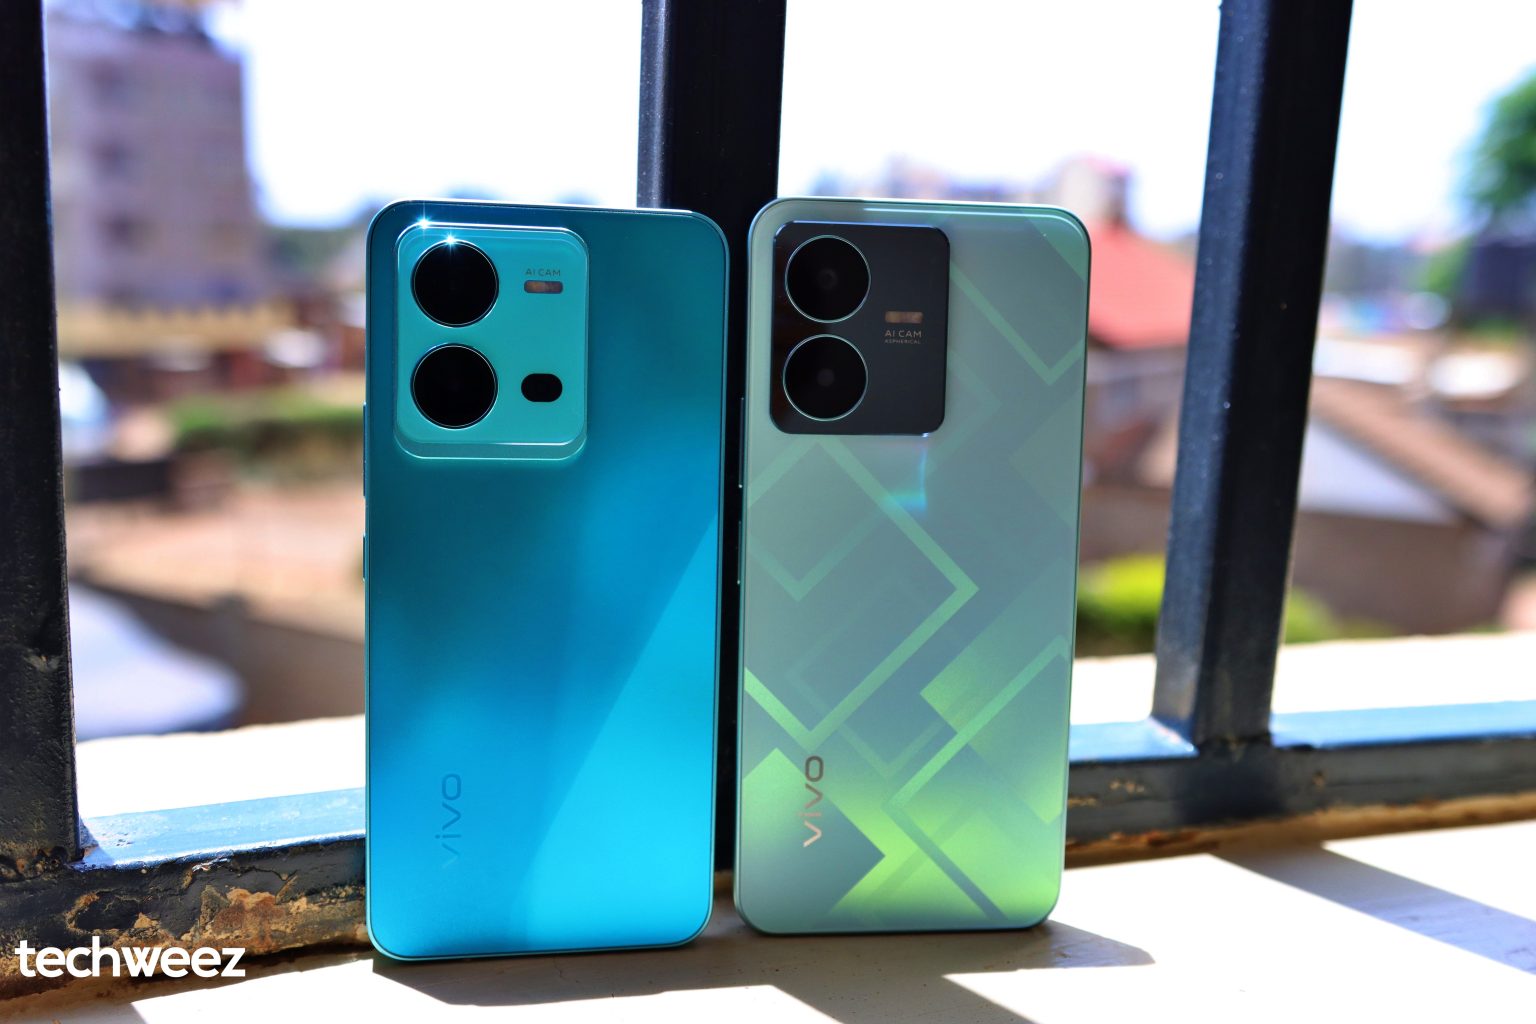 Vivo Y22 in Metaverse Green(right) and Vivo V25 in Aquamarine Blue(left)